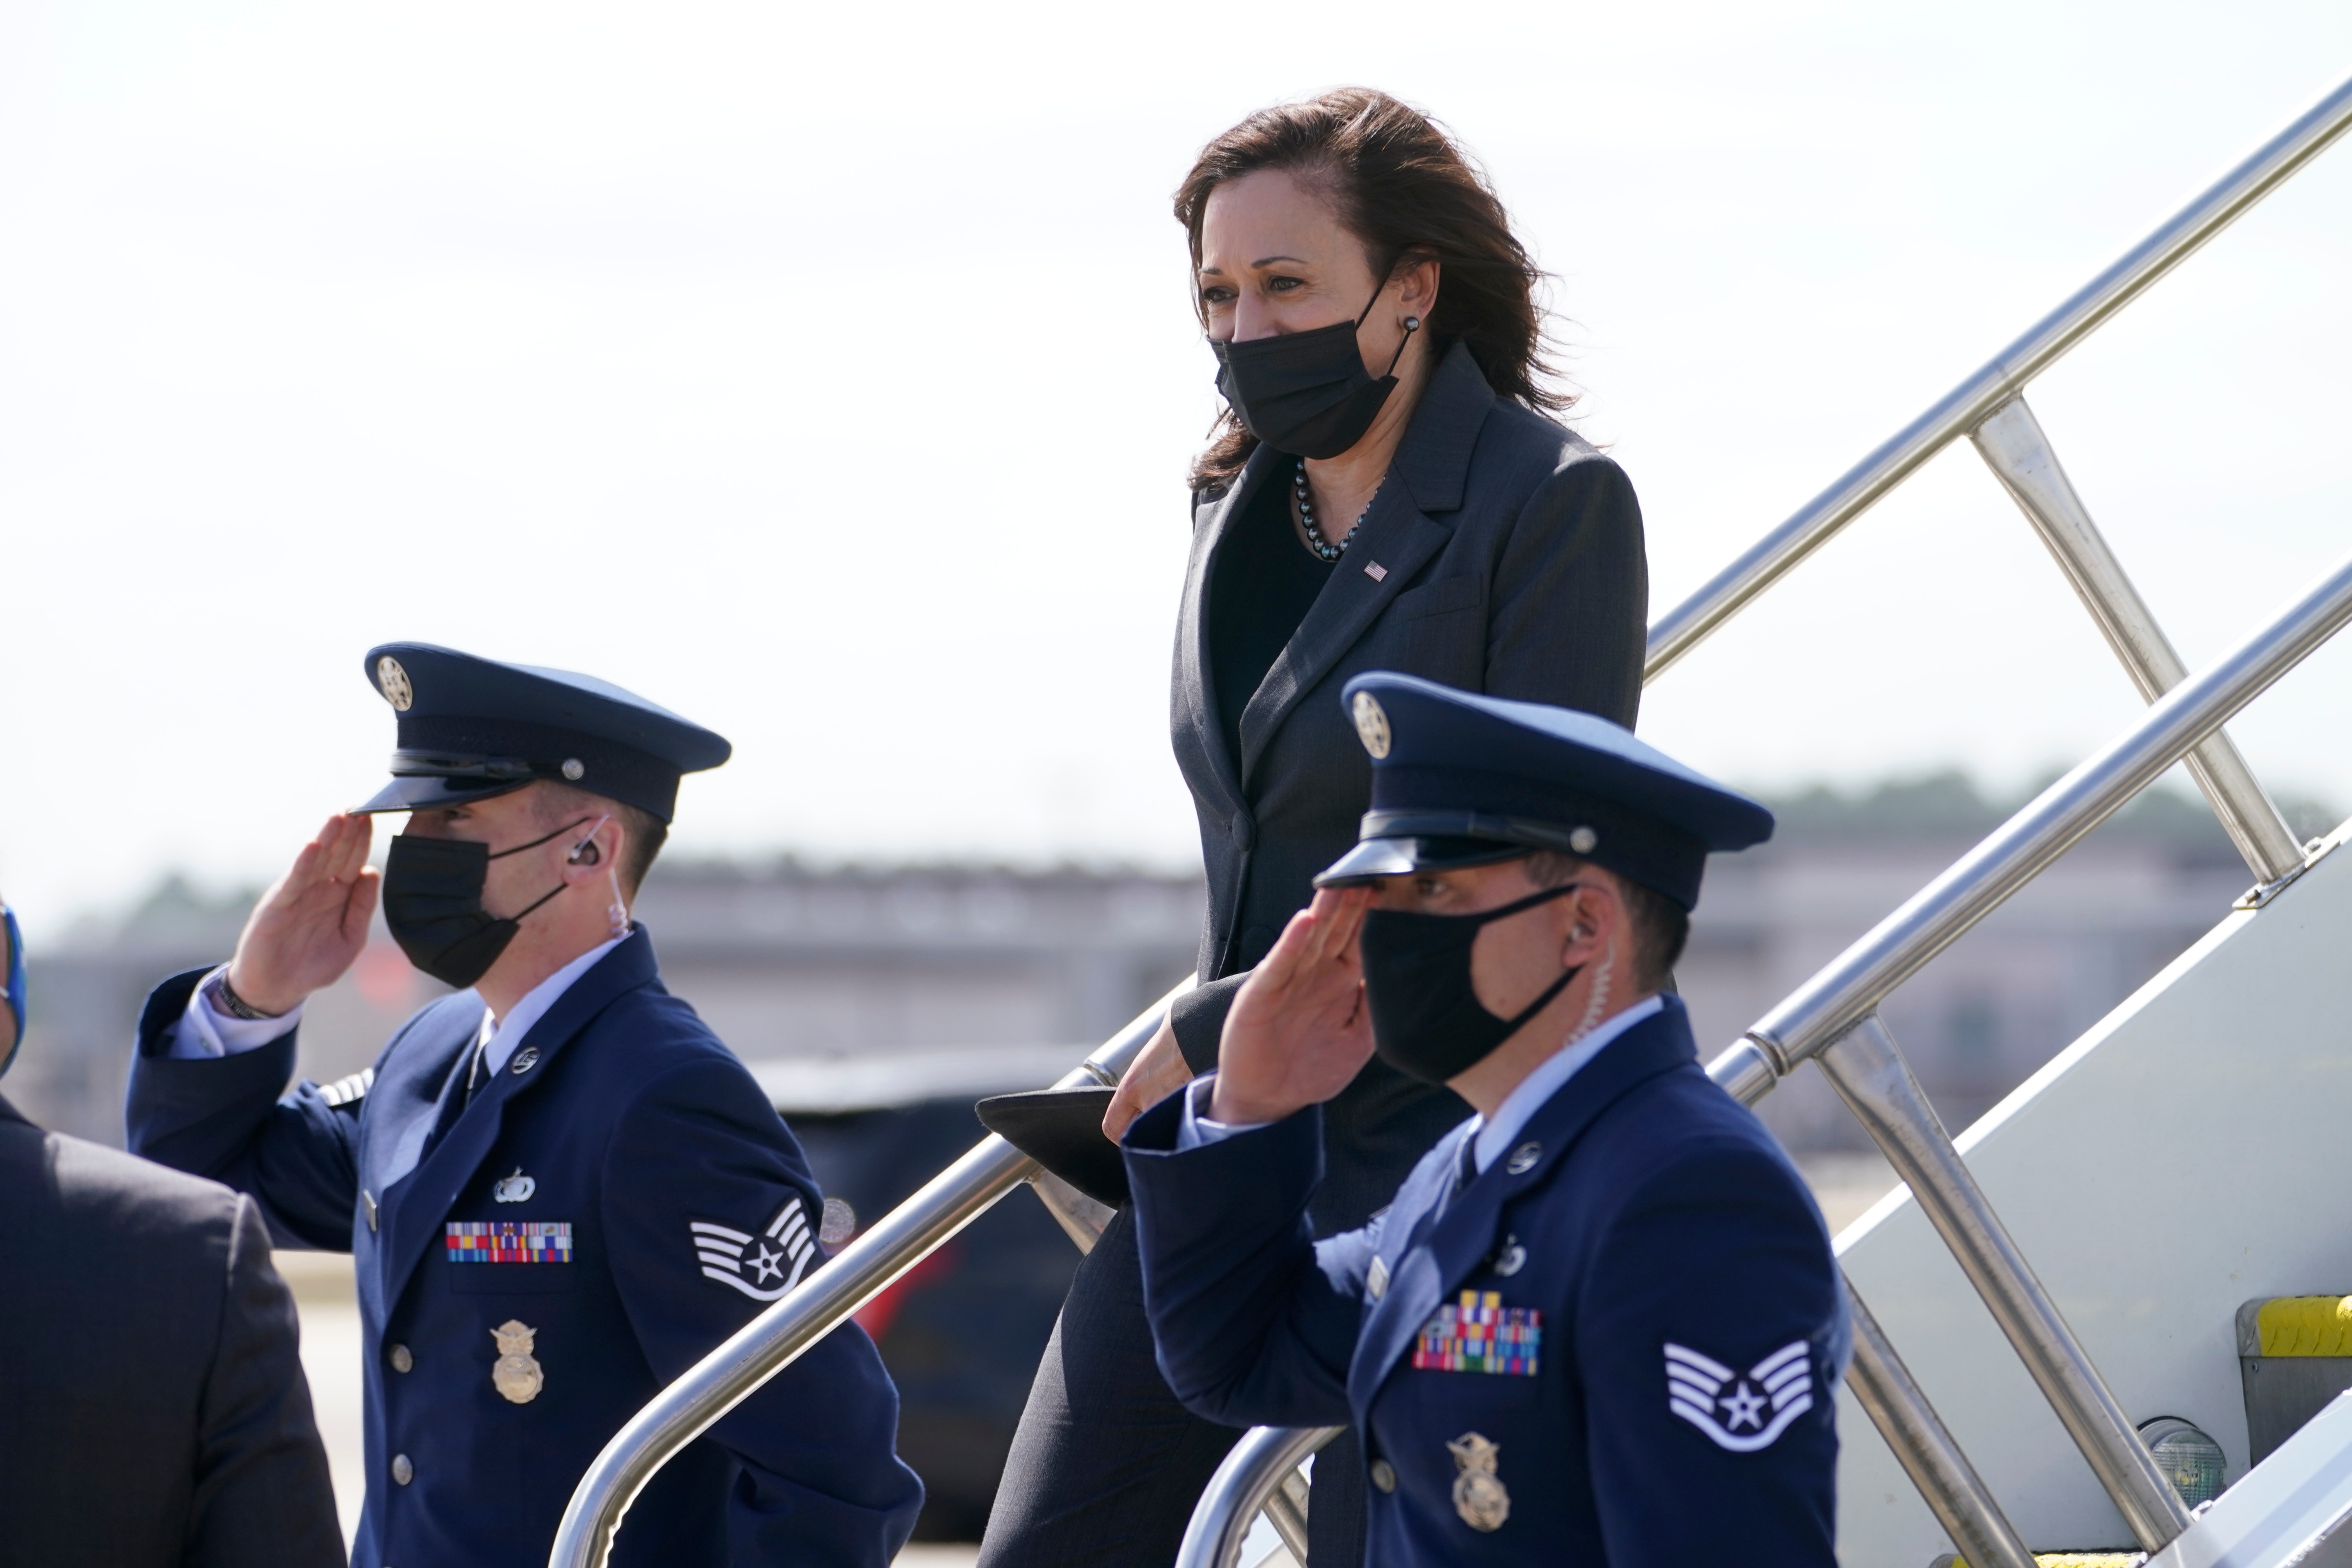 VP Harris repeatedly fails to salute military on Air Force Two, breaking with precedent